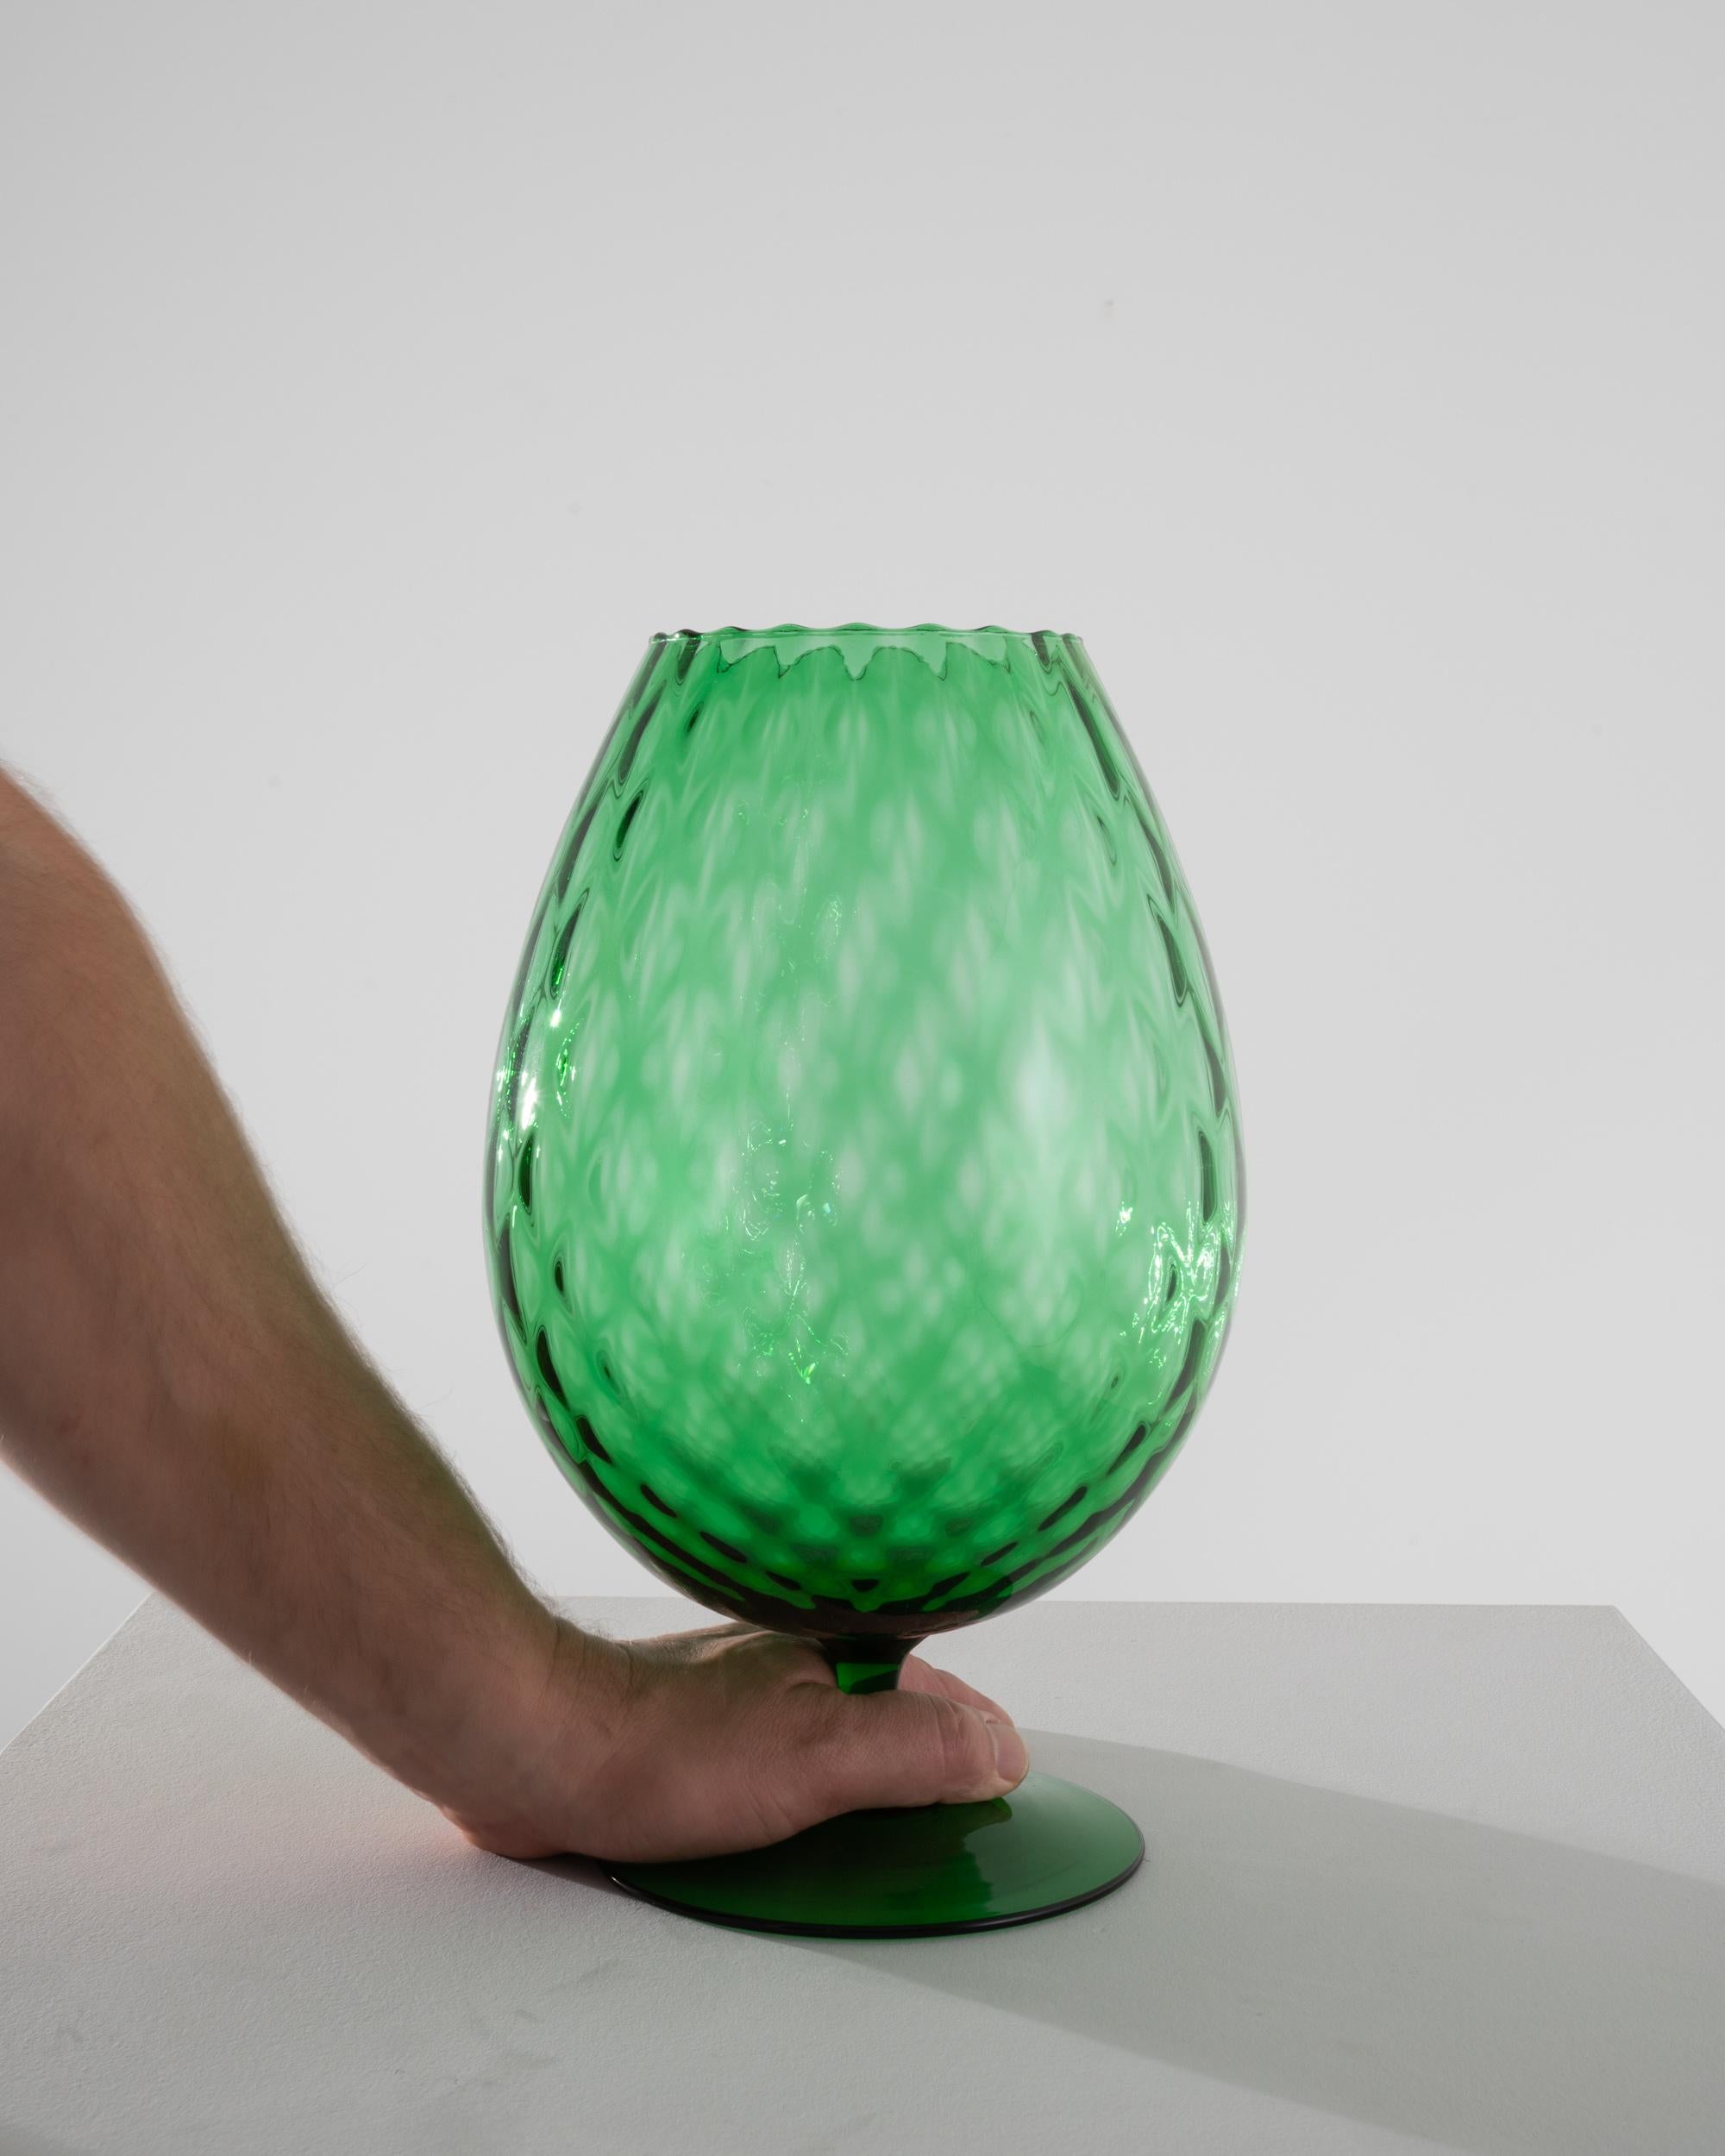 This 1960s Italian Green Glass Goblet is a dazzling piece of vintage charm, evoking the spirit of a bygone era with its vivid, emerald hue and classic design. The body of the goblet features an elegant, diamond-cut pattern, adding texture and